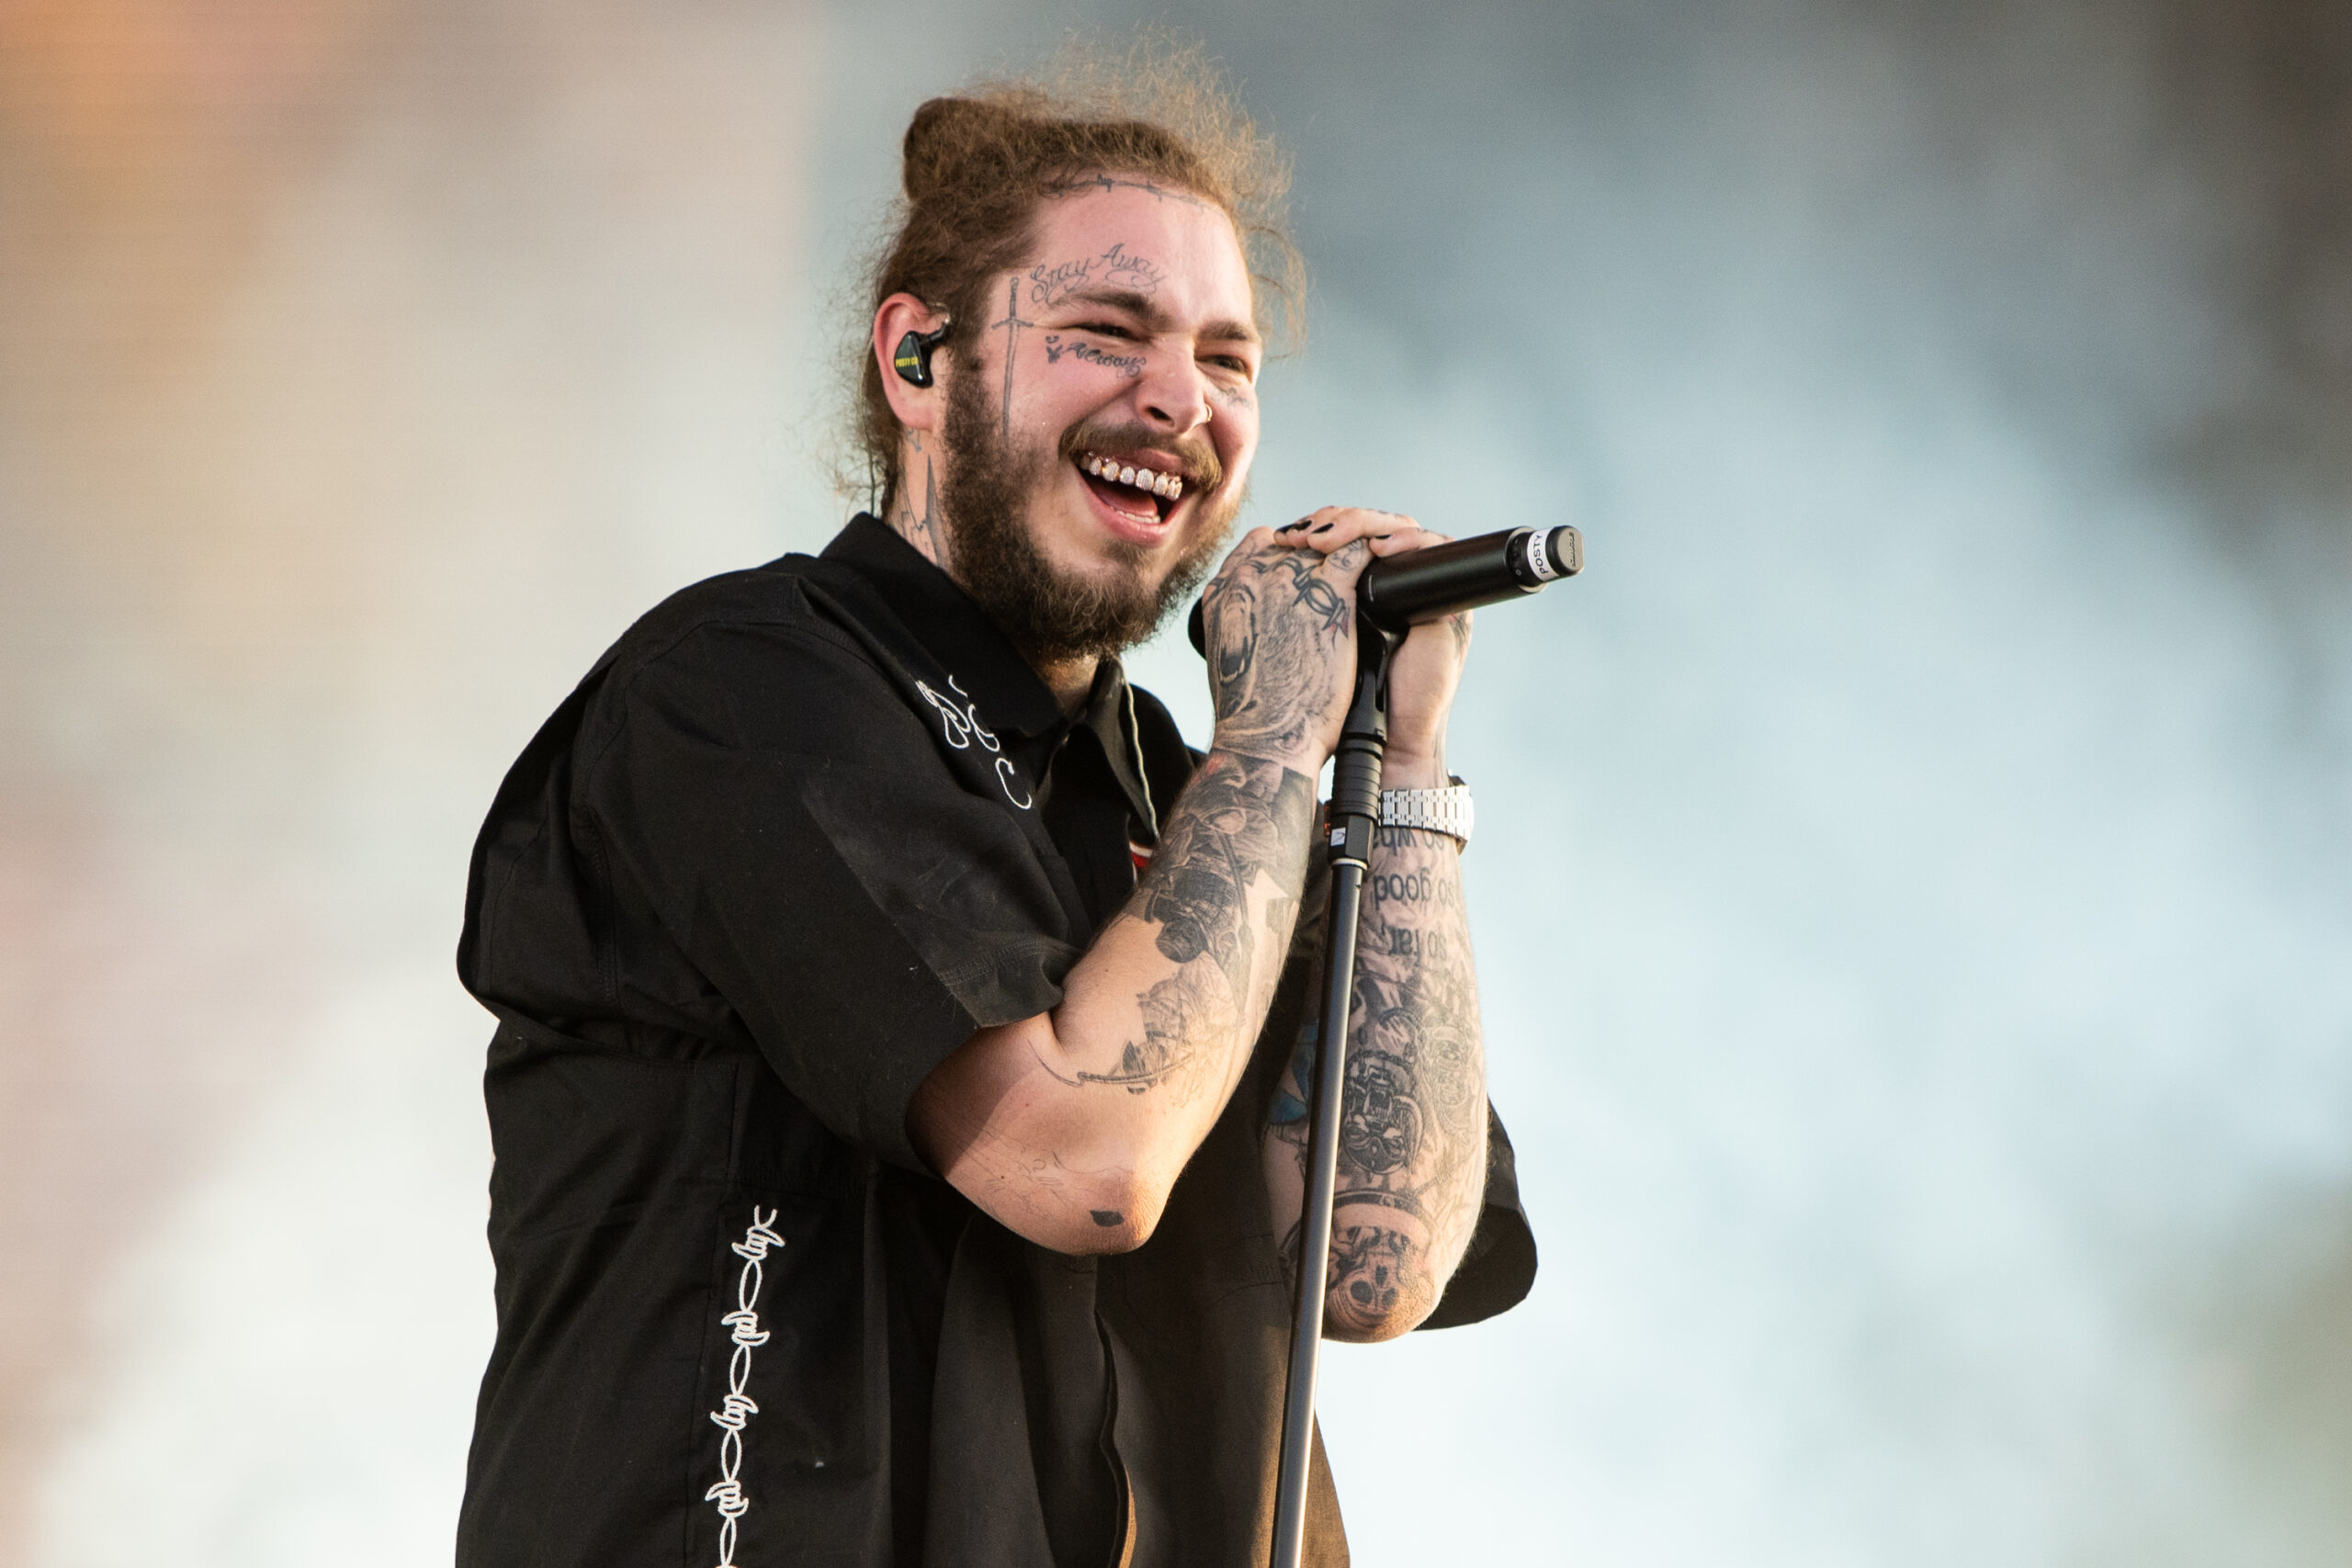 Post Malone Injures Ribs After Falling on Stage, Then Finishes Concert